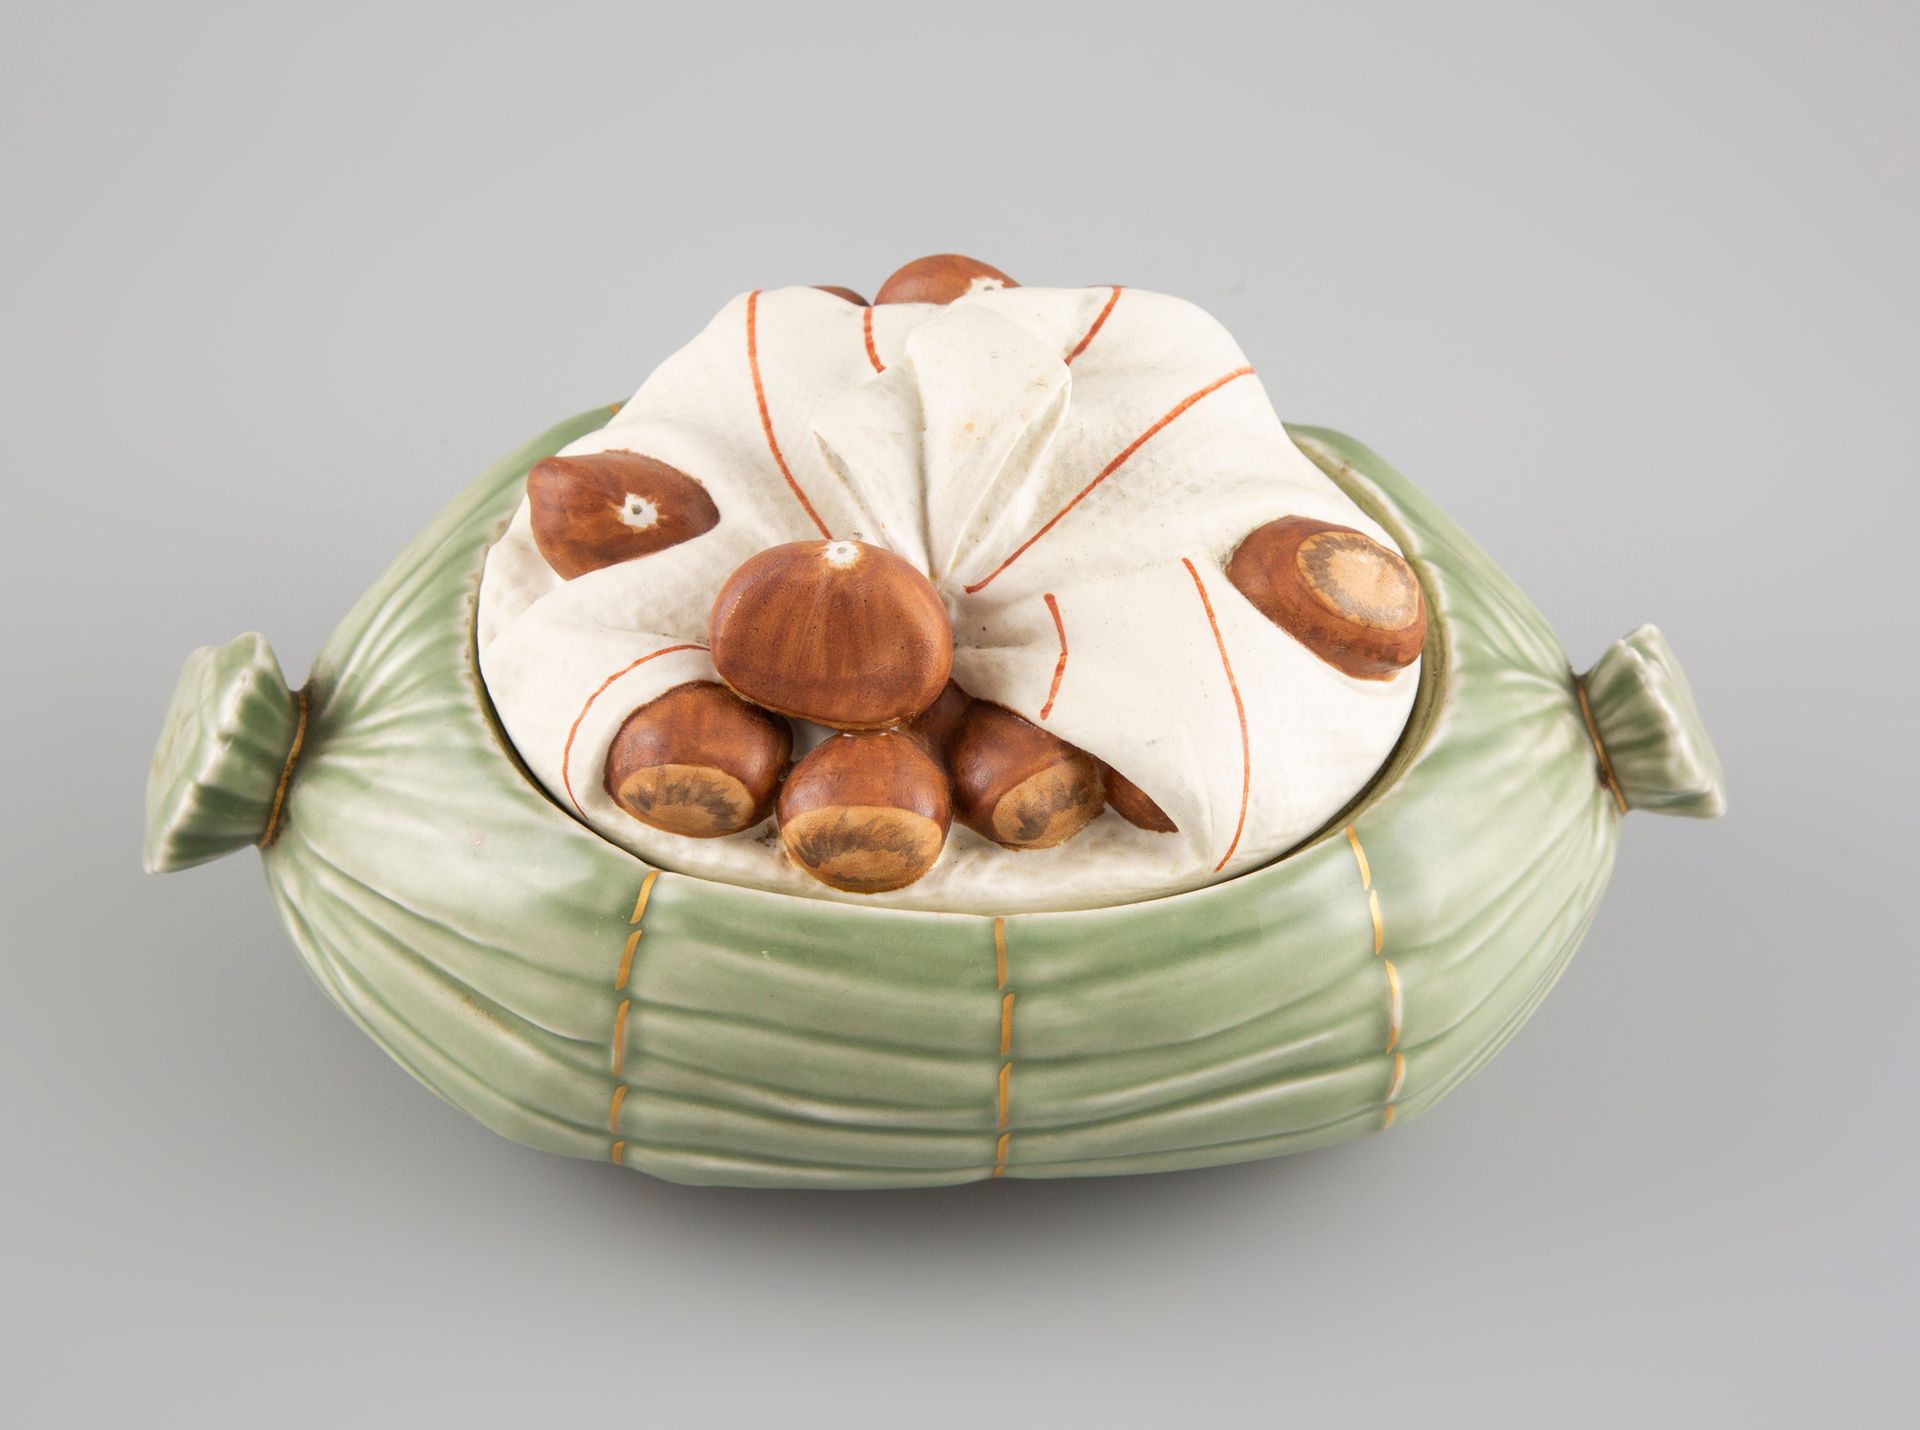 Null Mehun, The hot chestnuts

Porcelain. Wrapped in a cloth and a knotted corn &hellip;